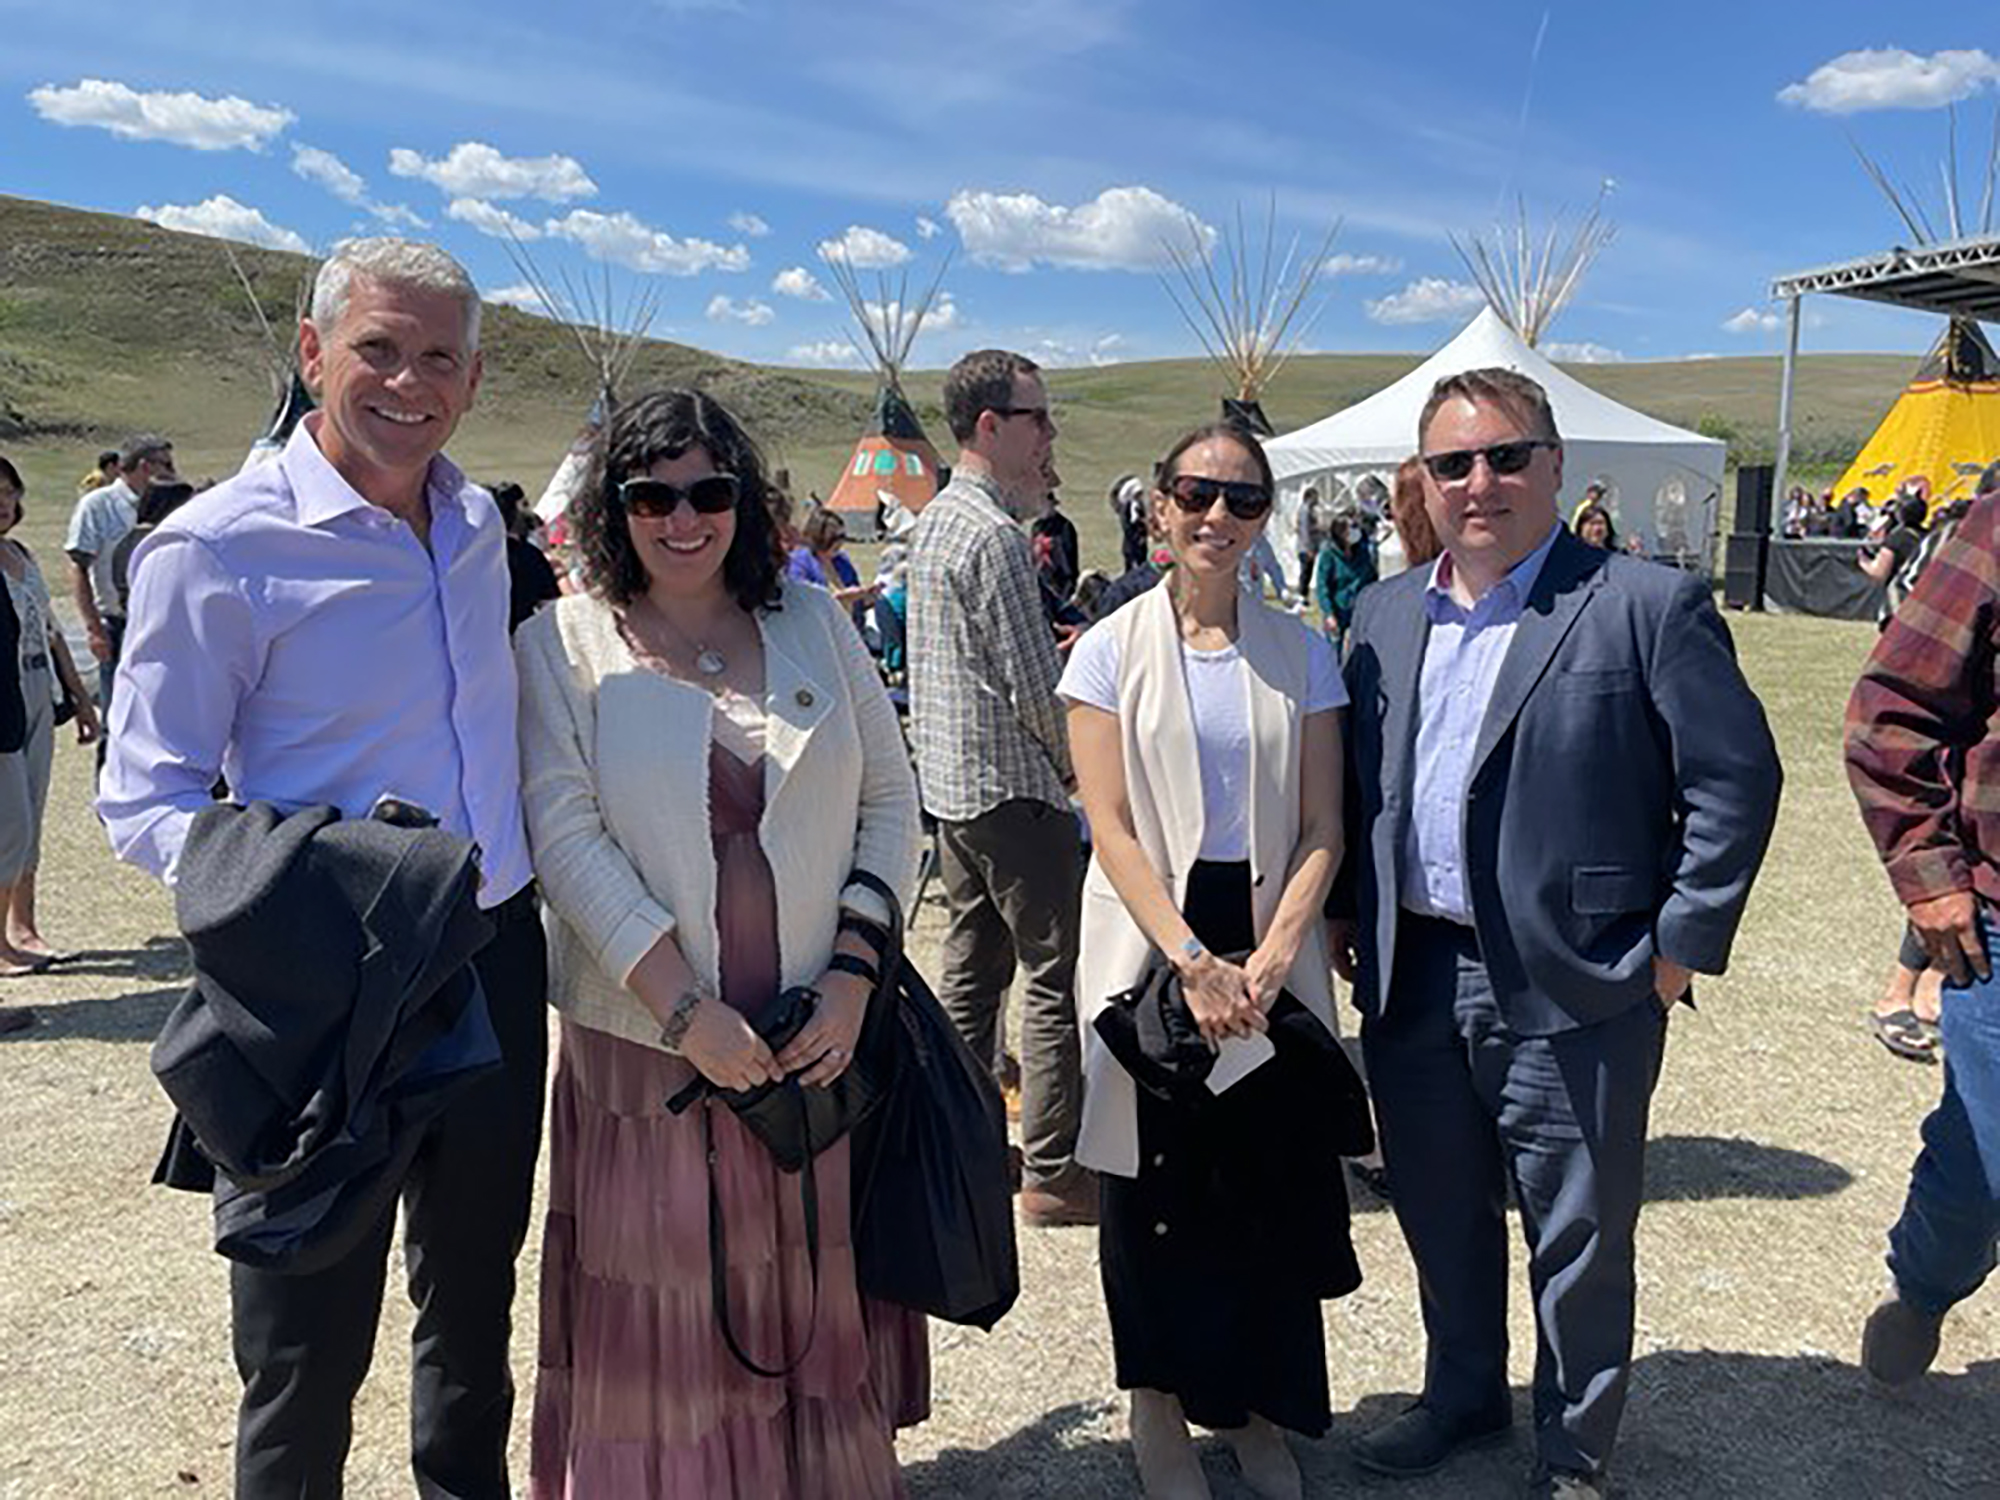 The team at RBC, led by RBC Royal Trust's Anthony Wright and RBC Philips, Hager & North's Gord Keesic, are proud of the relationship with Siksika.